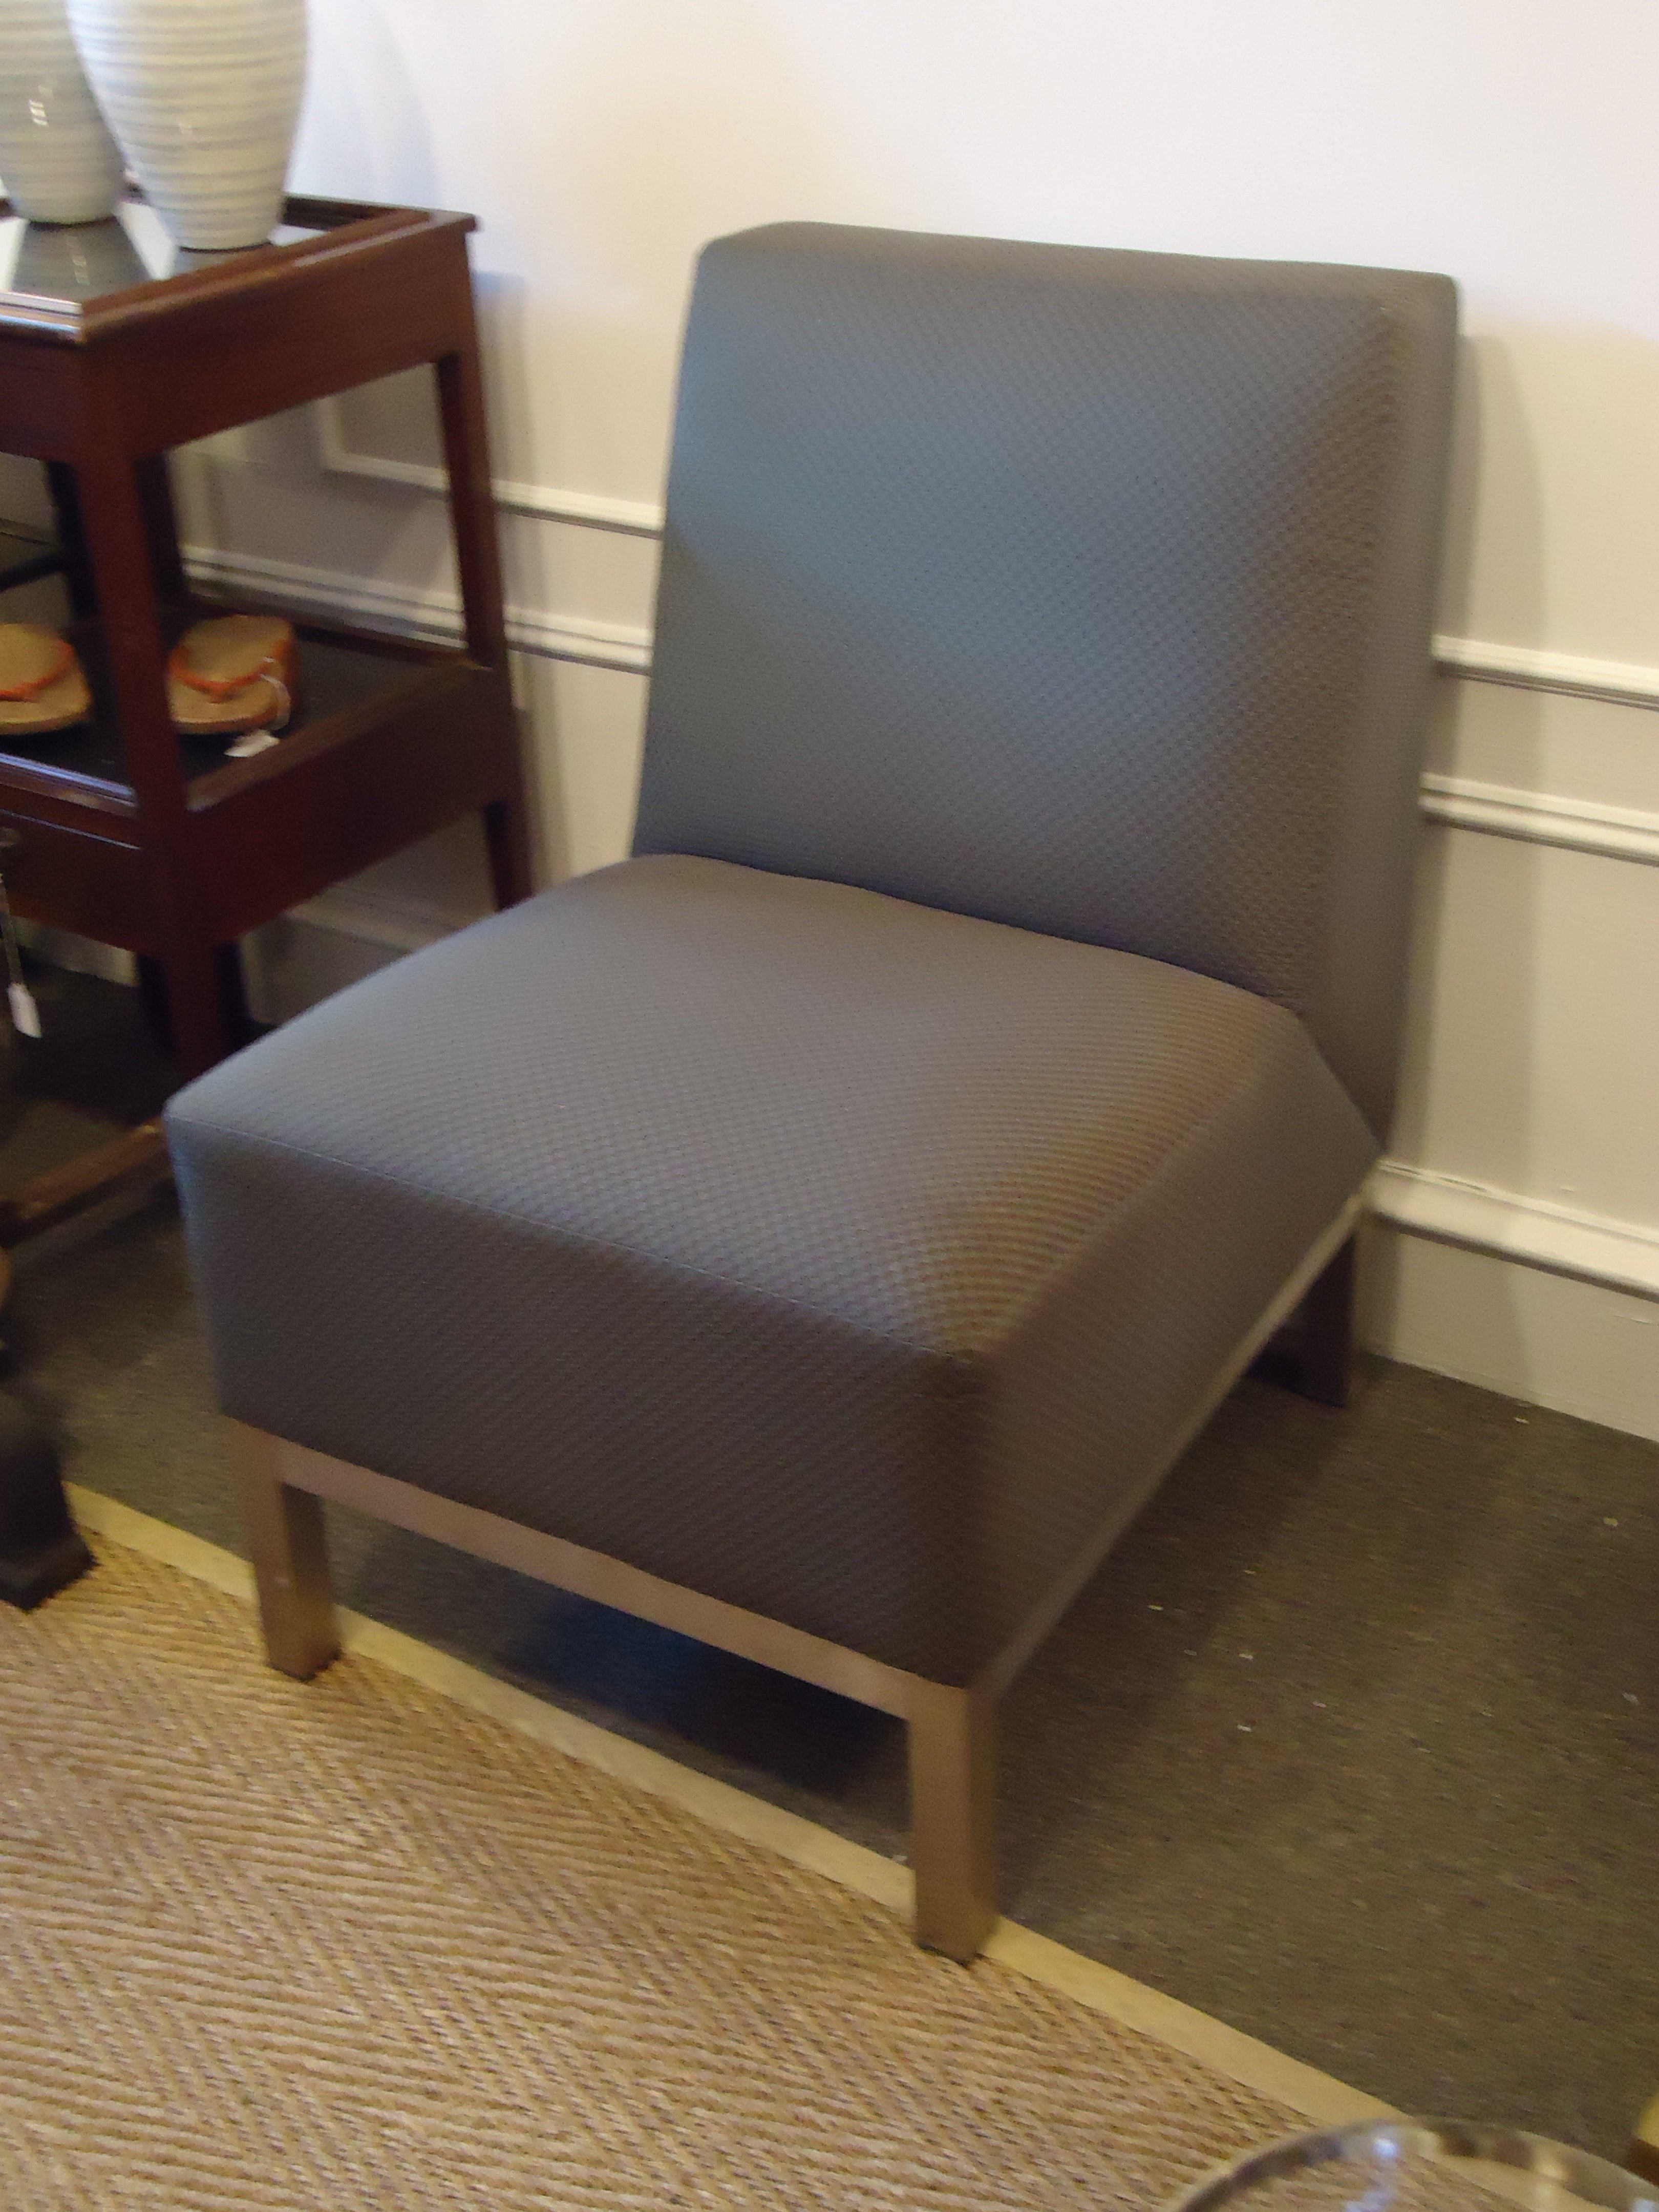 Pair of Midcentury Slipper Chairs with Stainless Steel Legs